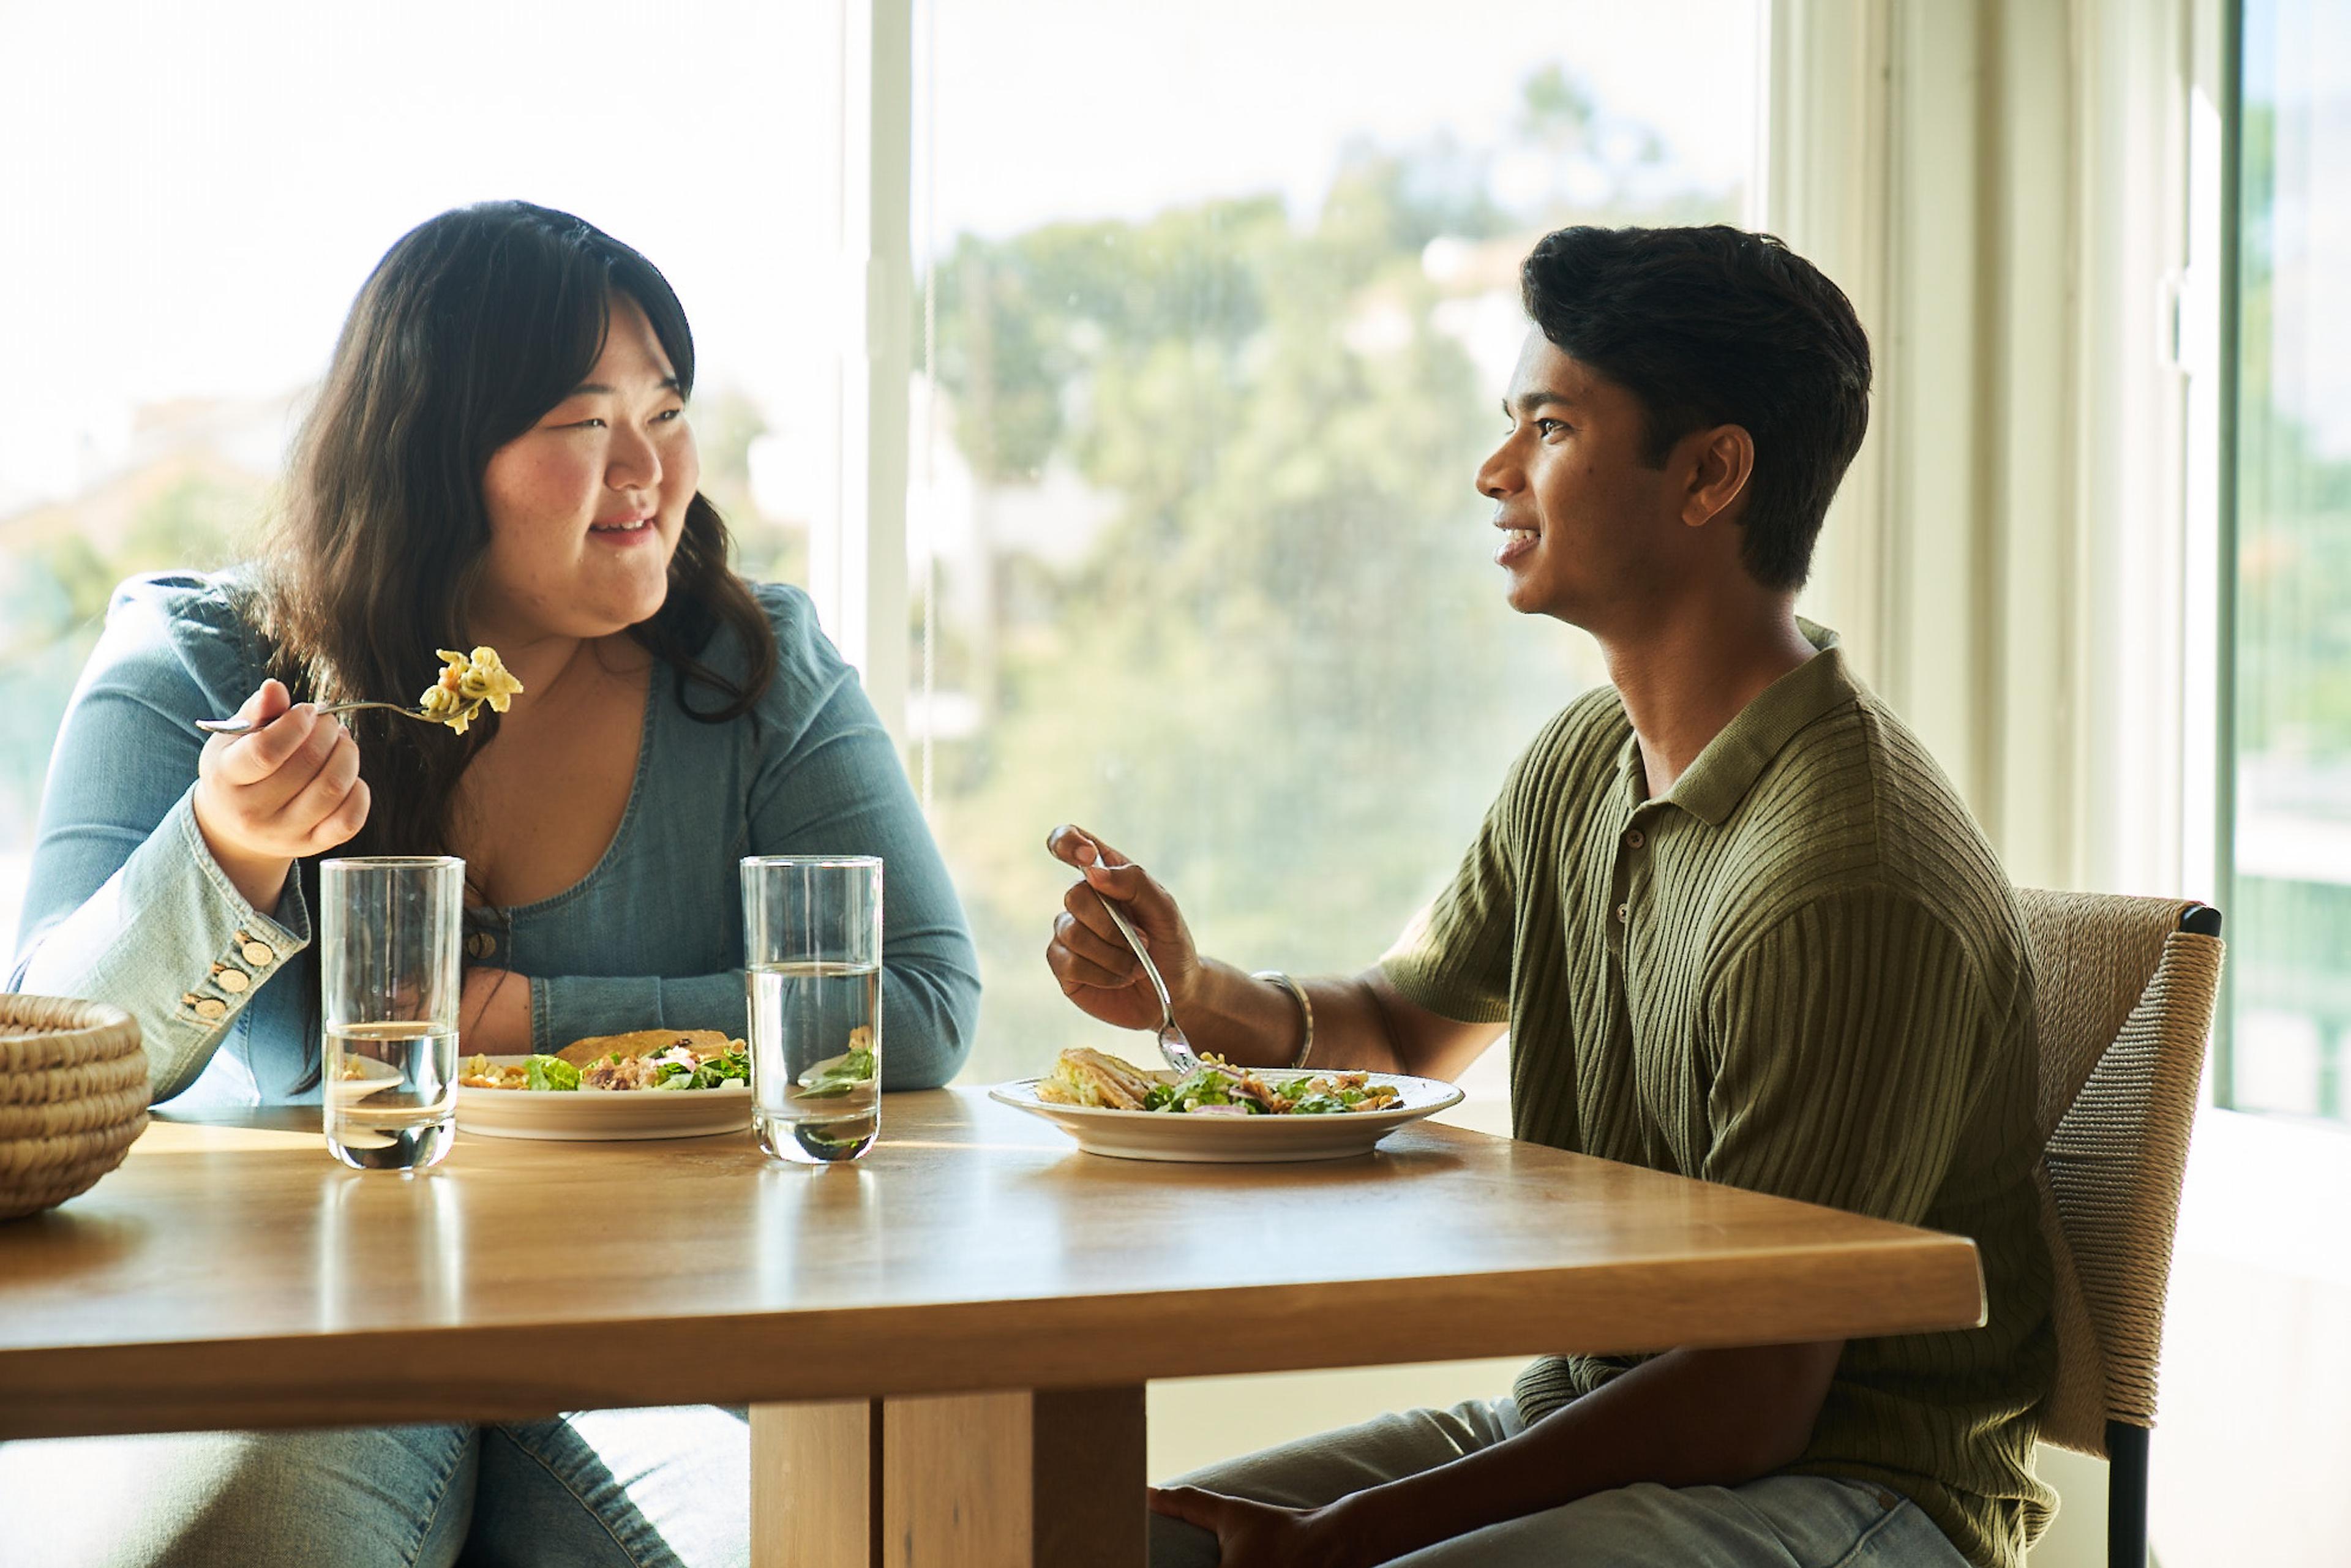 Two people sharing a meal together in a brightly lit room.